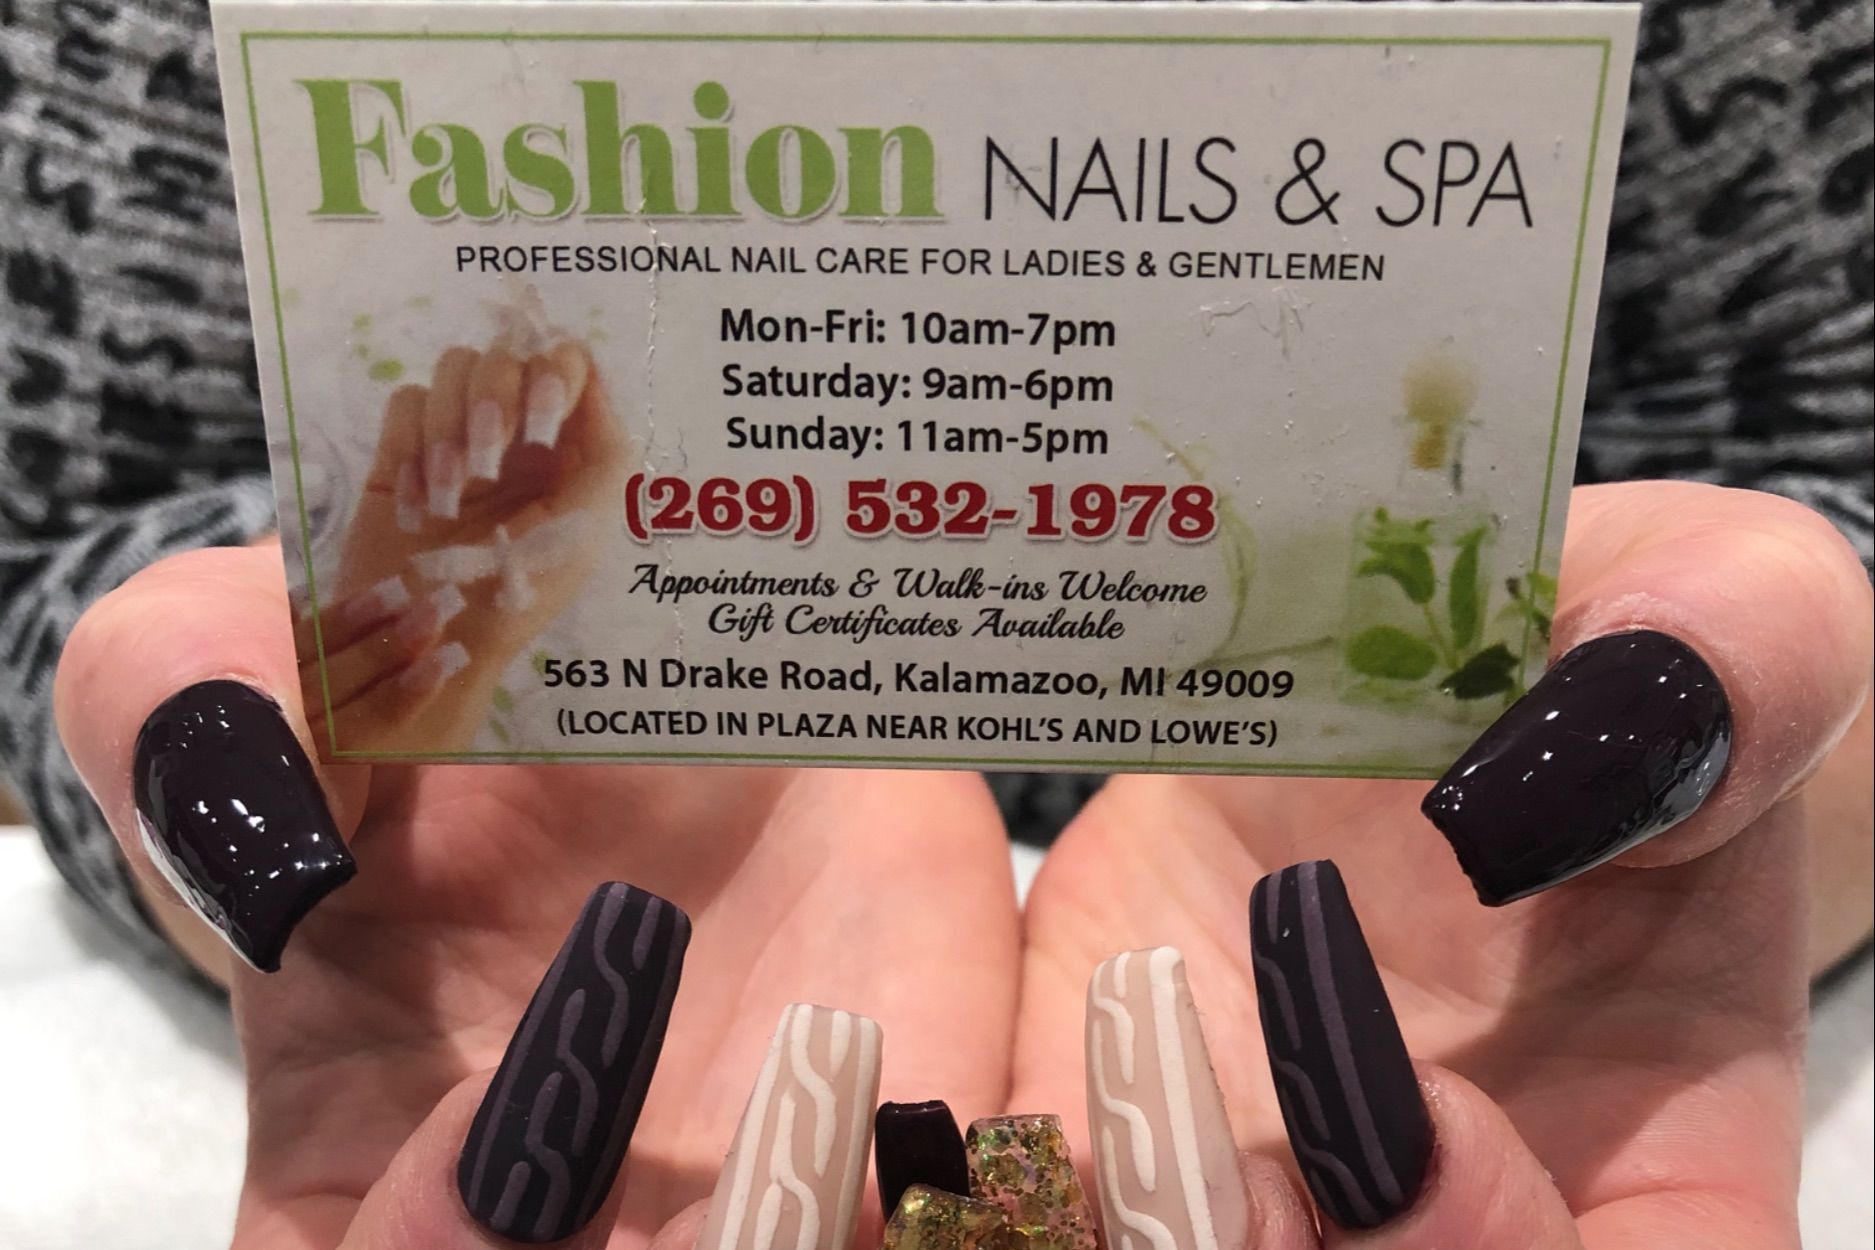 Holiday Manicure with Christmas Nail Art Design by Millys Hair Lashes Nails   The Moonberry Blog